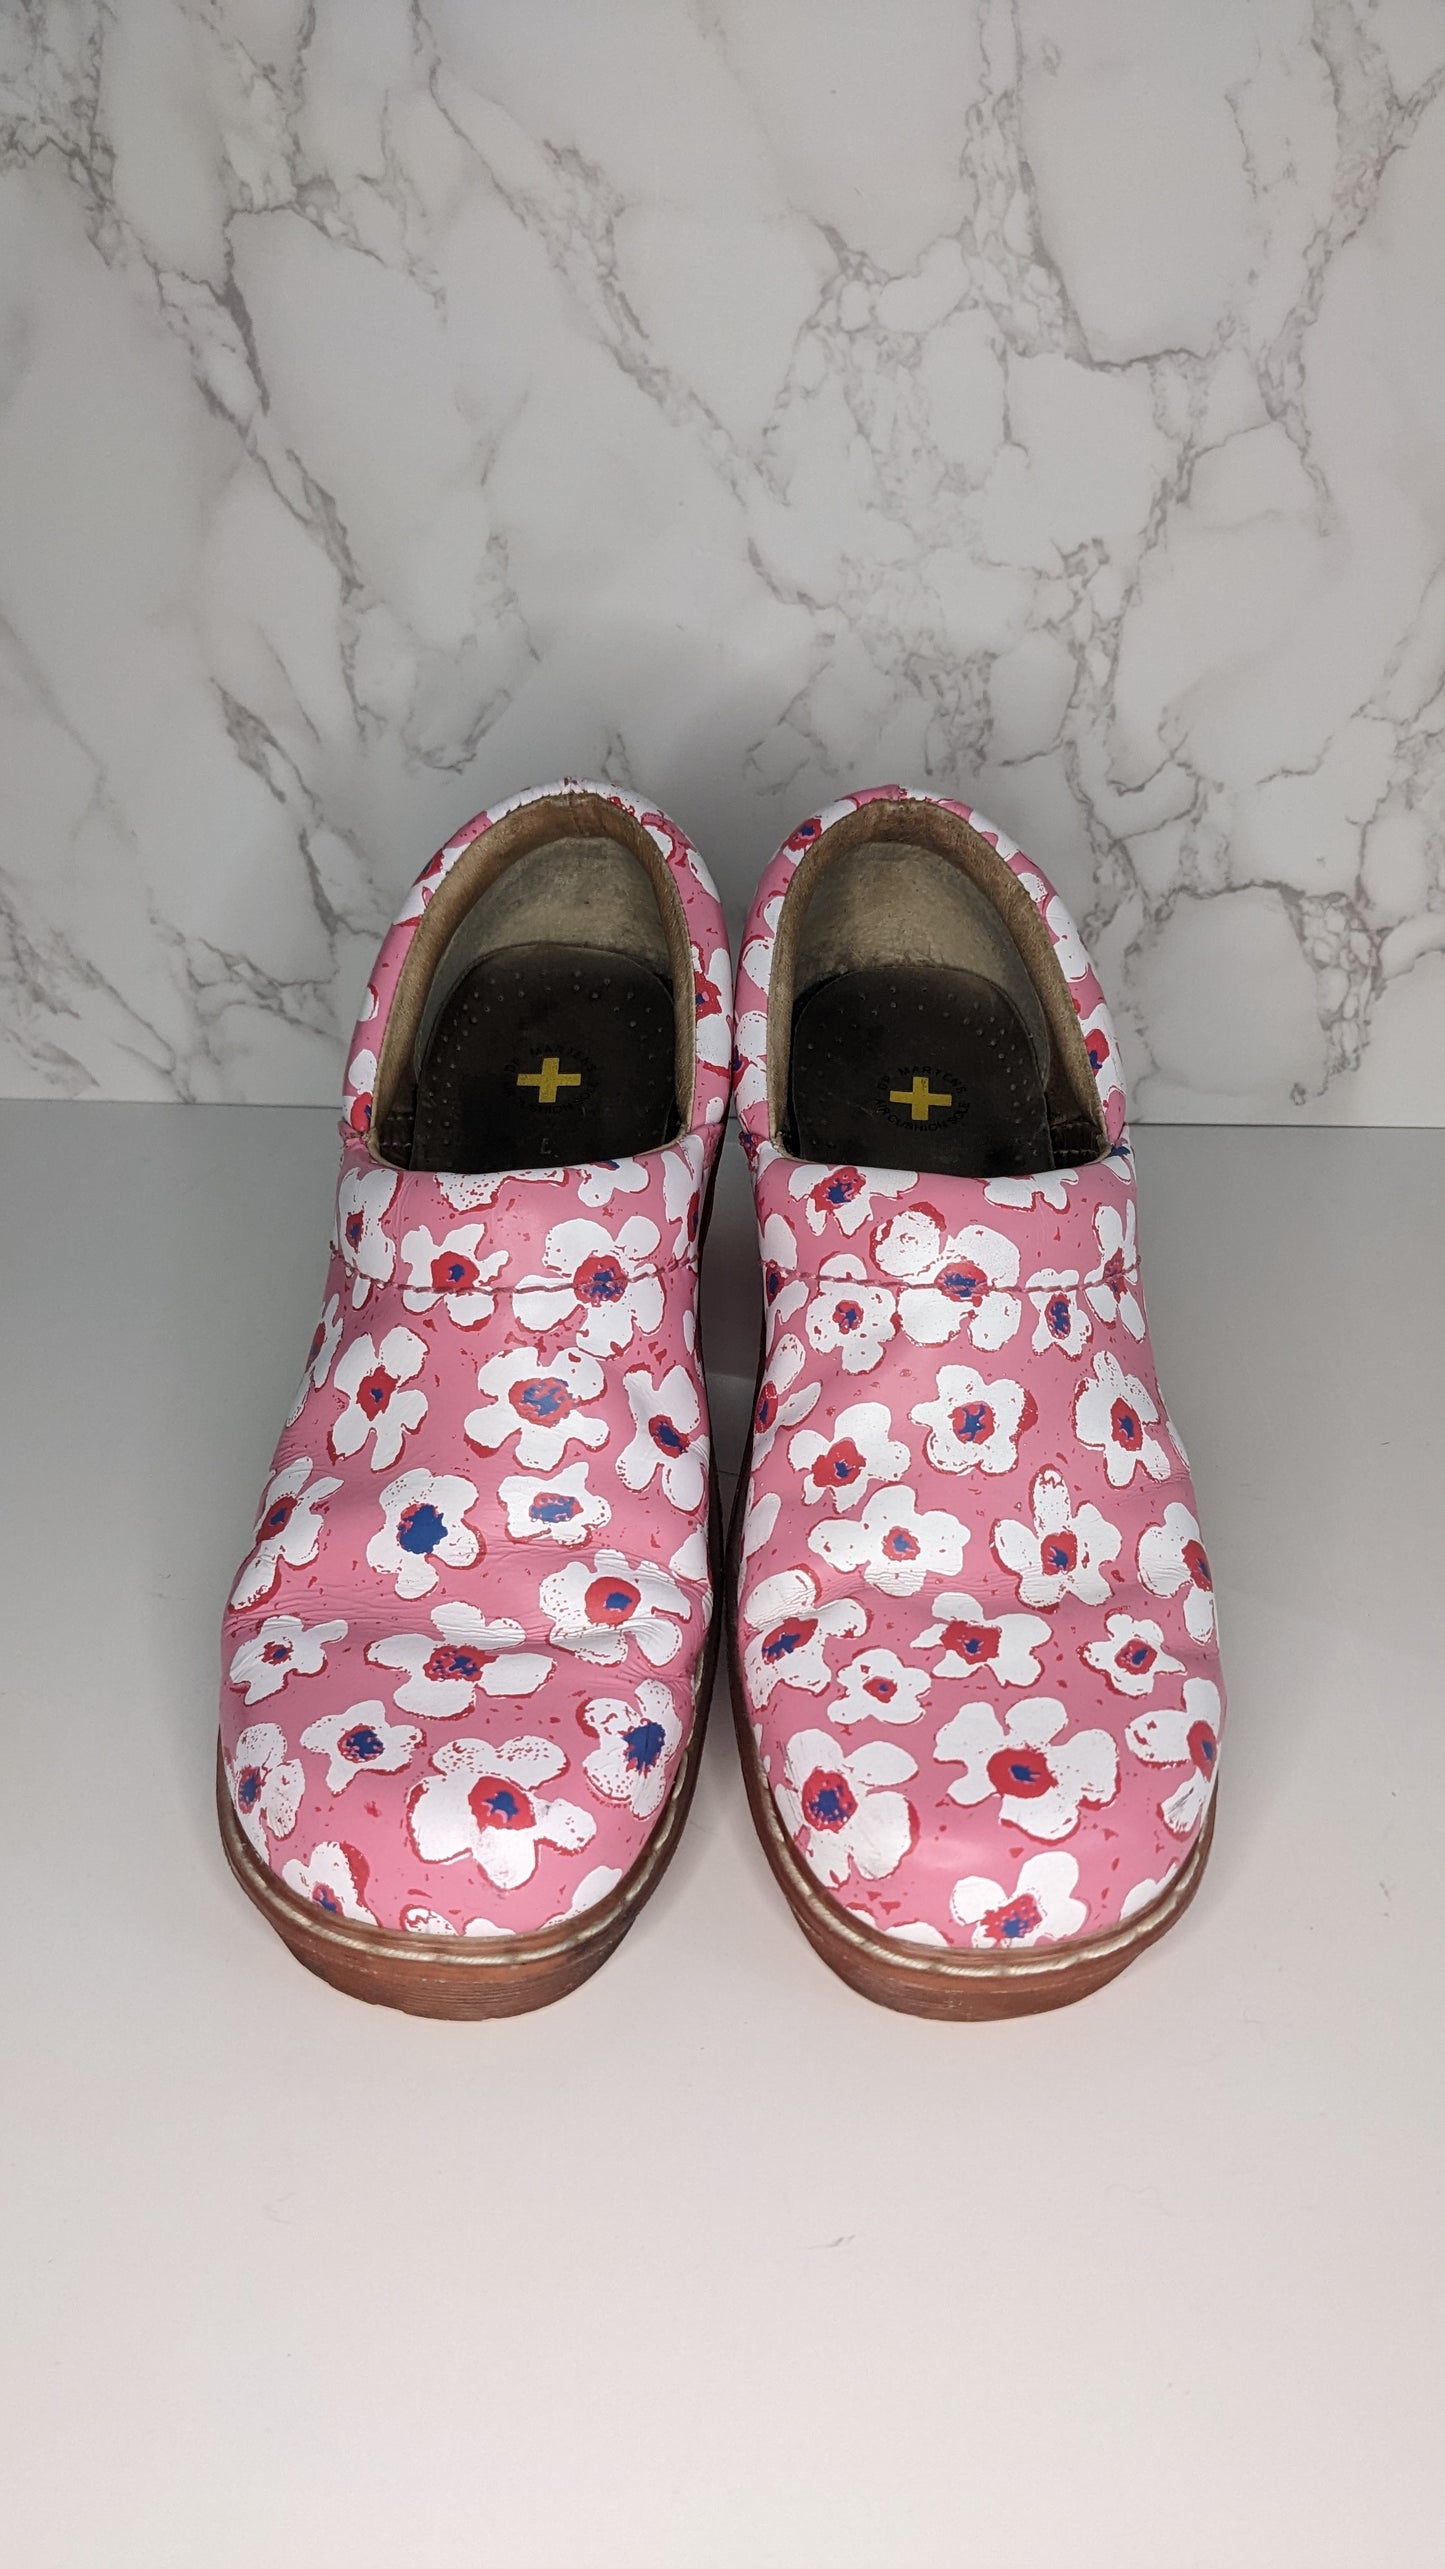 Dr. Martens Pink and White Flower Clog